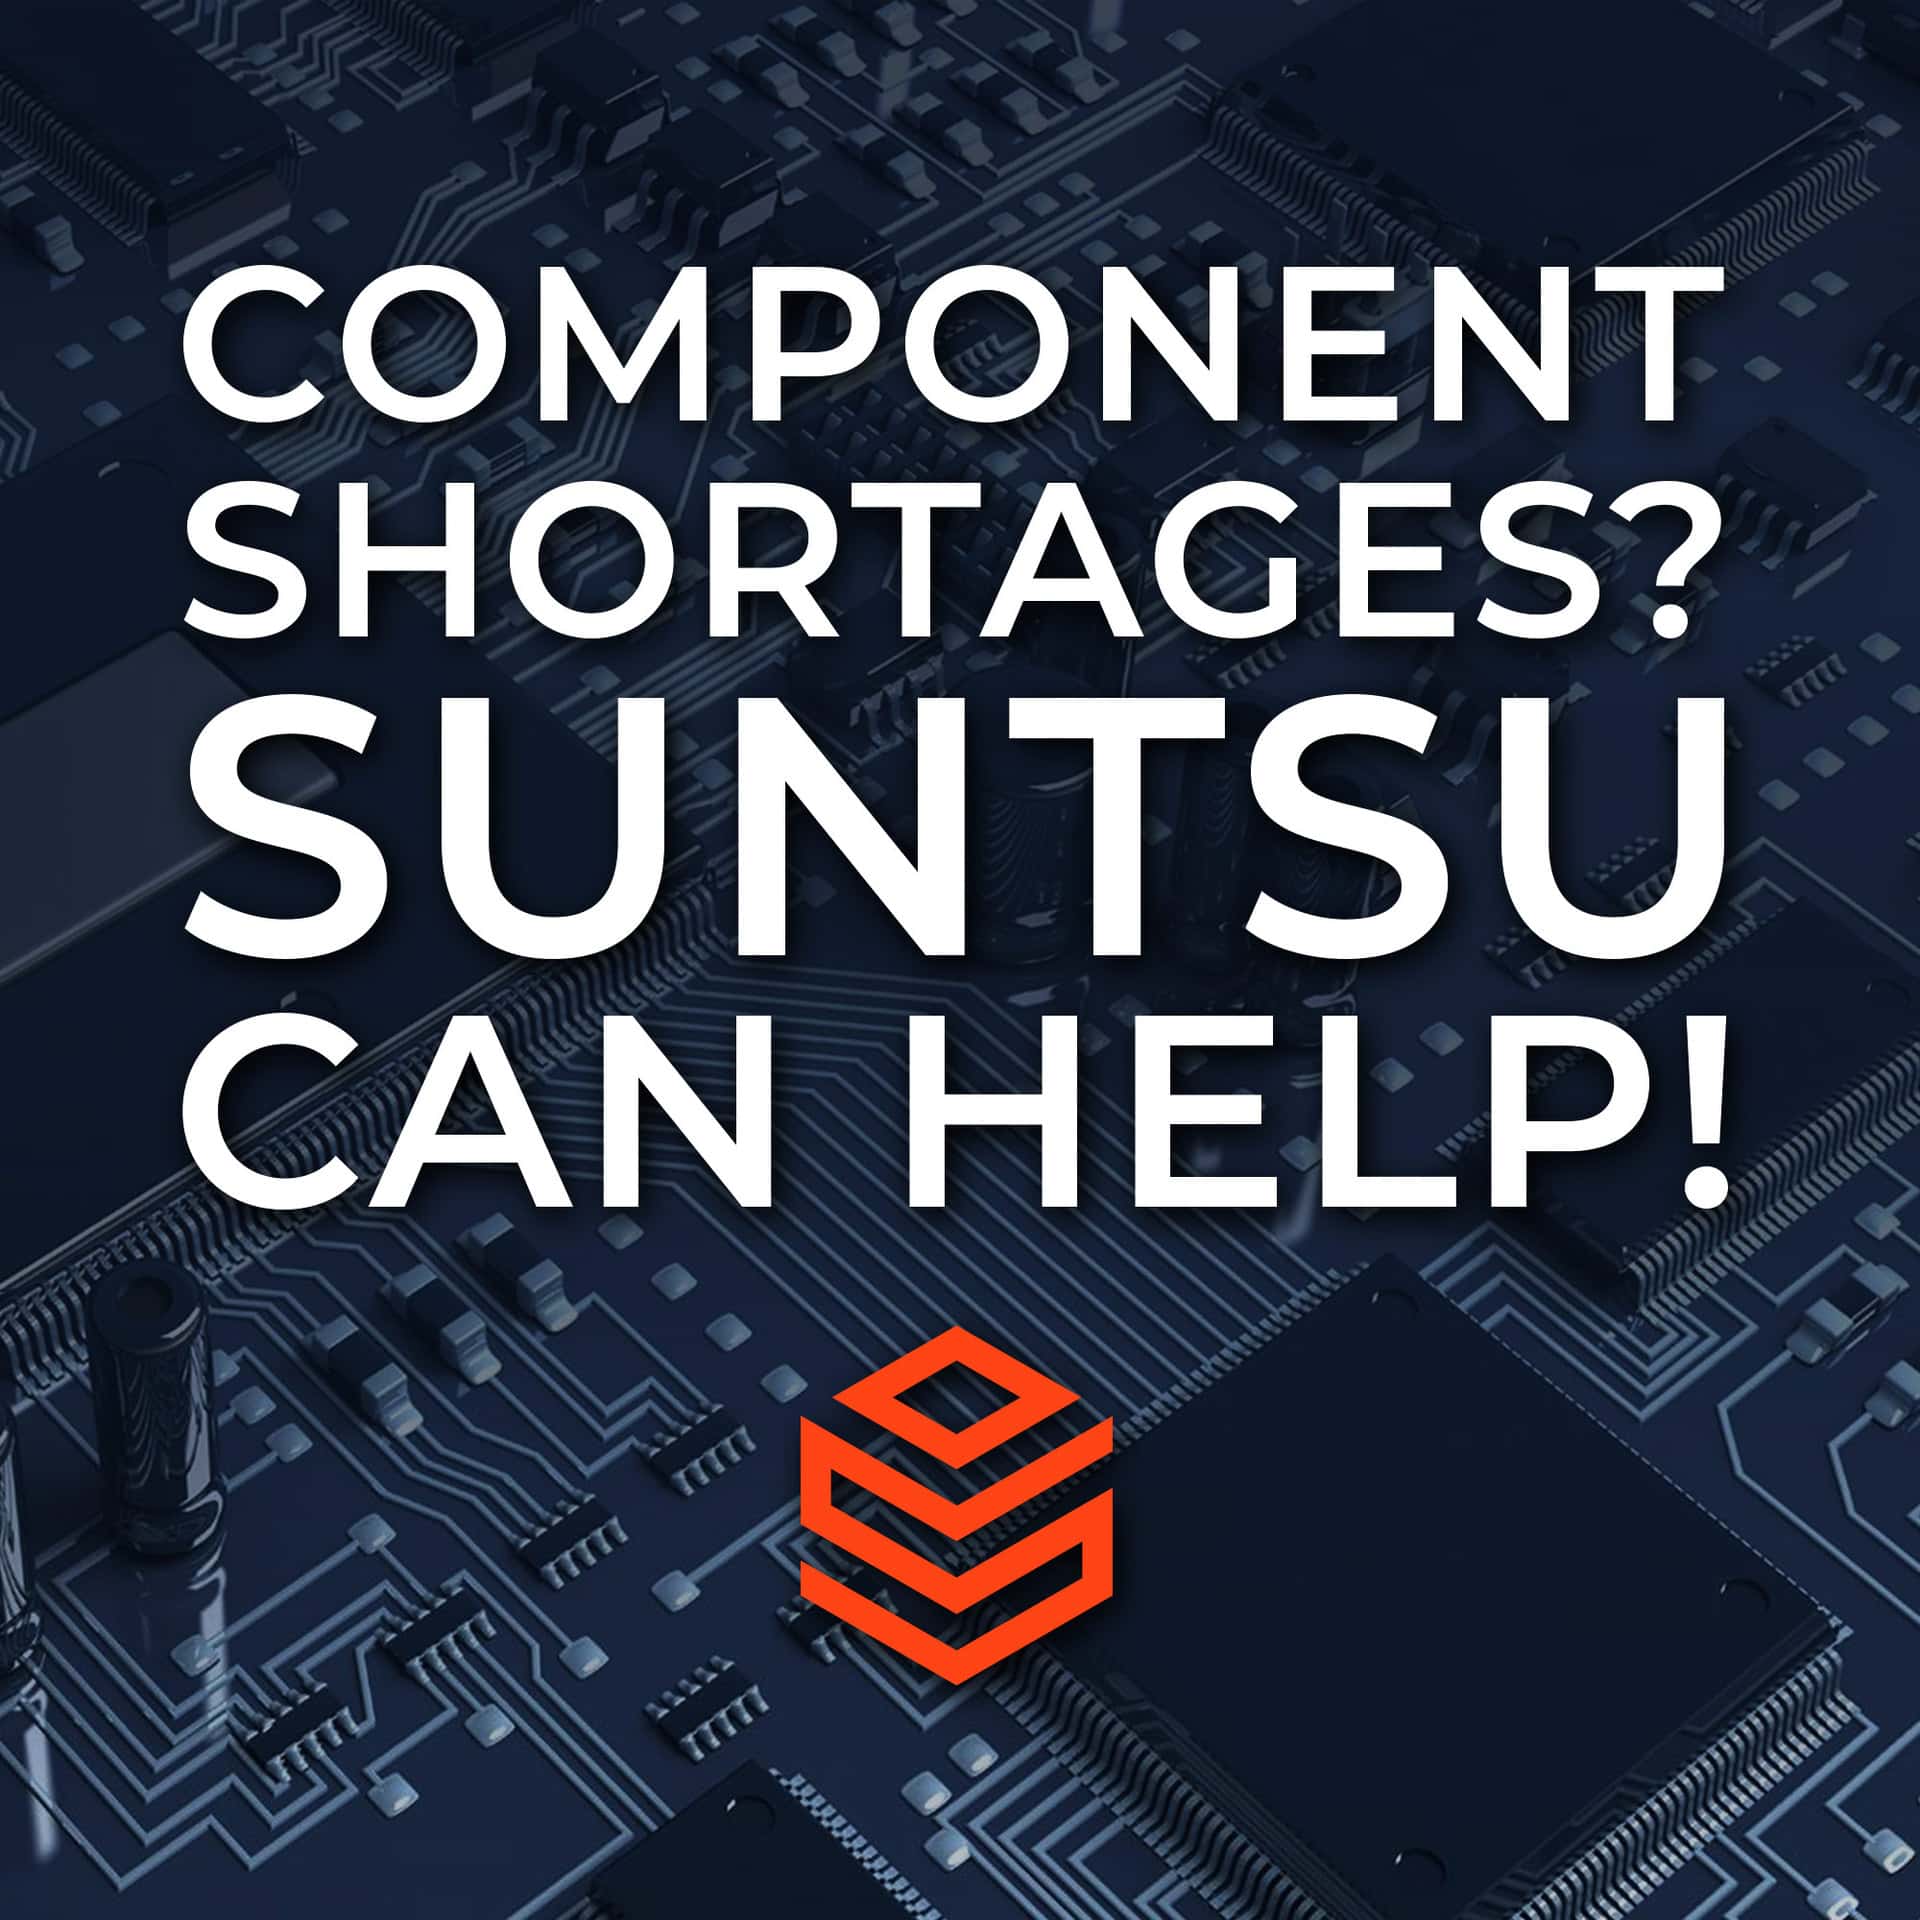 Product Shortages? Not an issue with Suntsu